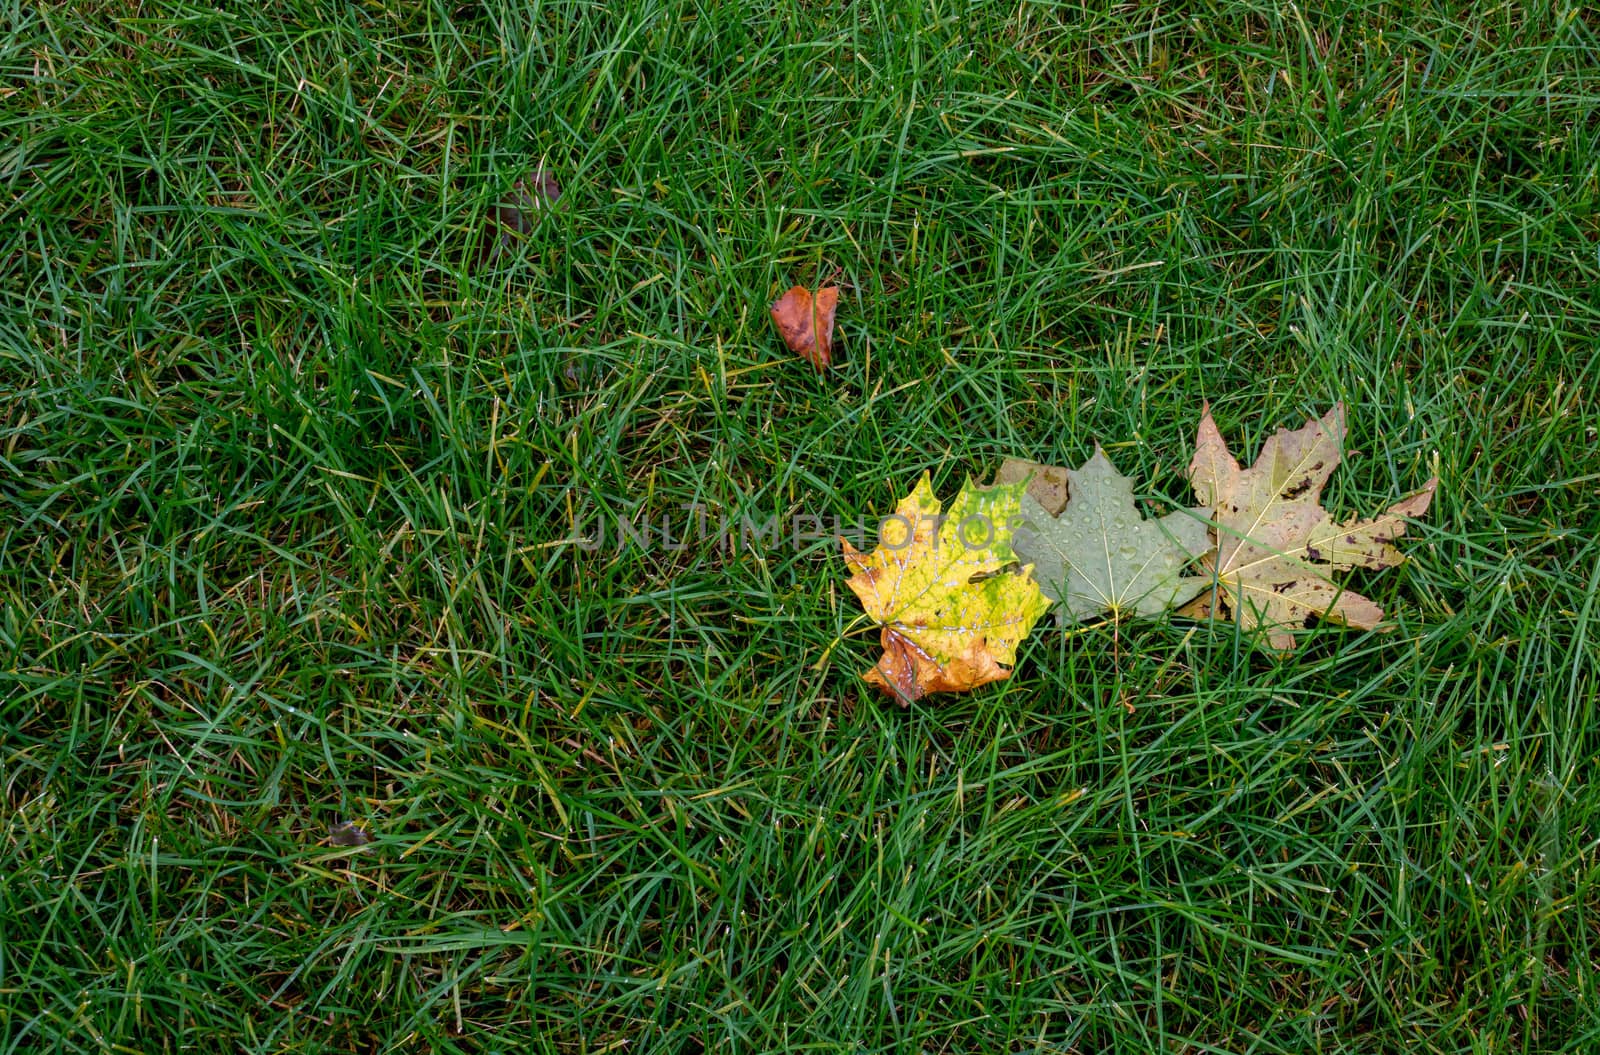 Fallen maple leaves on grass field. Autumn concept of fallen leaves on a green grass lawn. Dry leaves contrast with green grass.